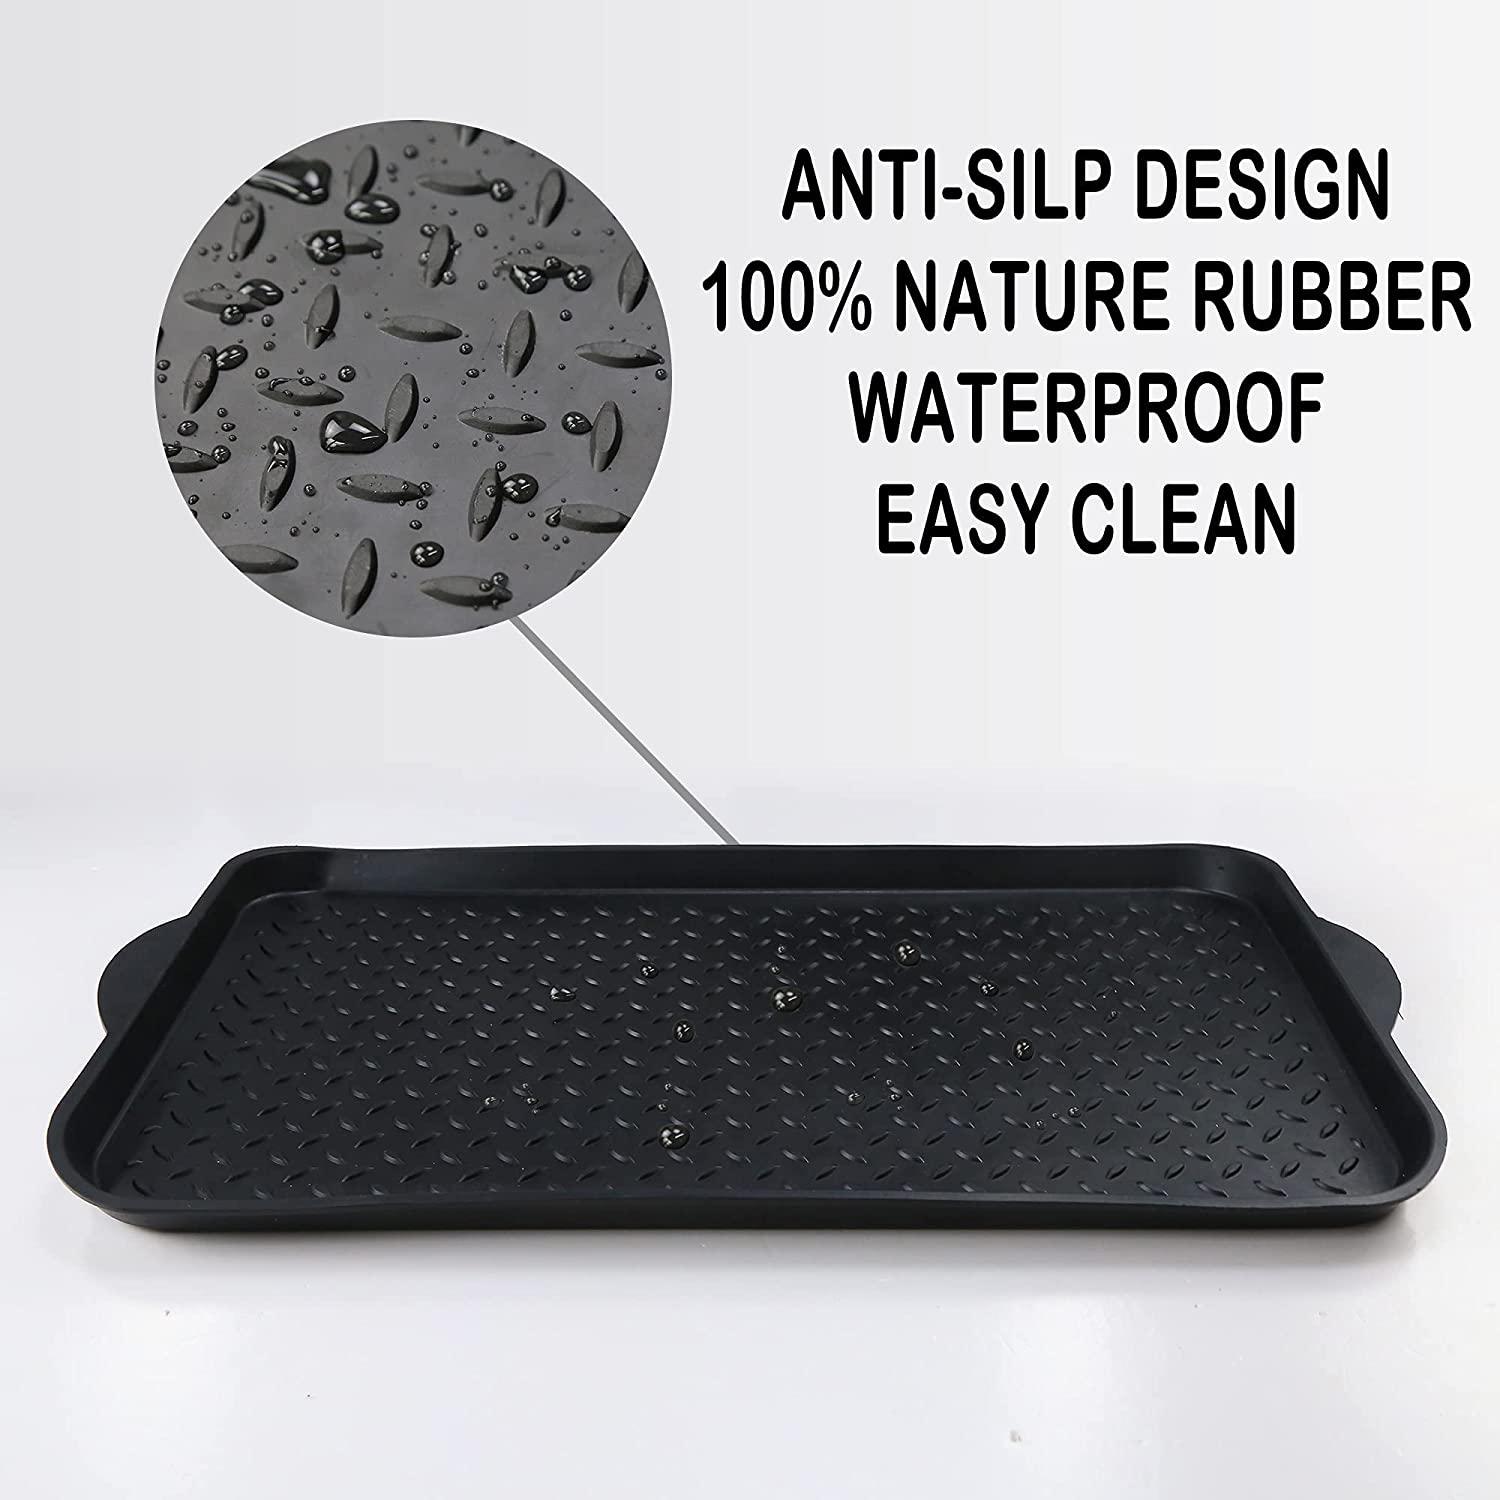 Matace 100% Rubber Boot Tray for Entryway - Water Resistant Shoe Trays-  Natural Rubber Mats for Shoes, Boots, Pets - Indoor and Outdoor Use,  27.95x 15.74, Black (1 Pack) 27.95 x 15.74